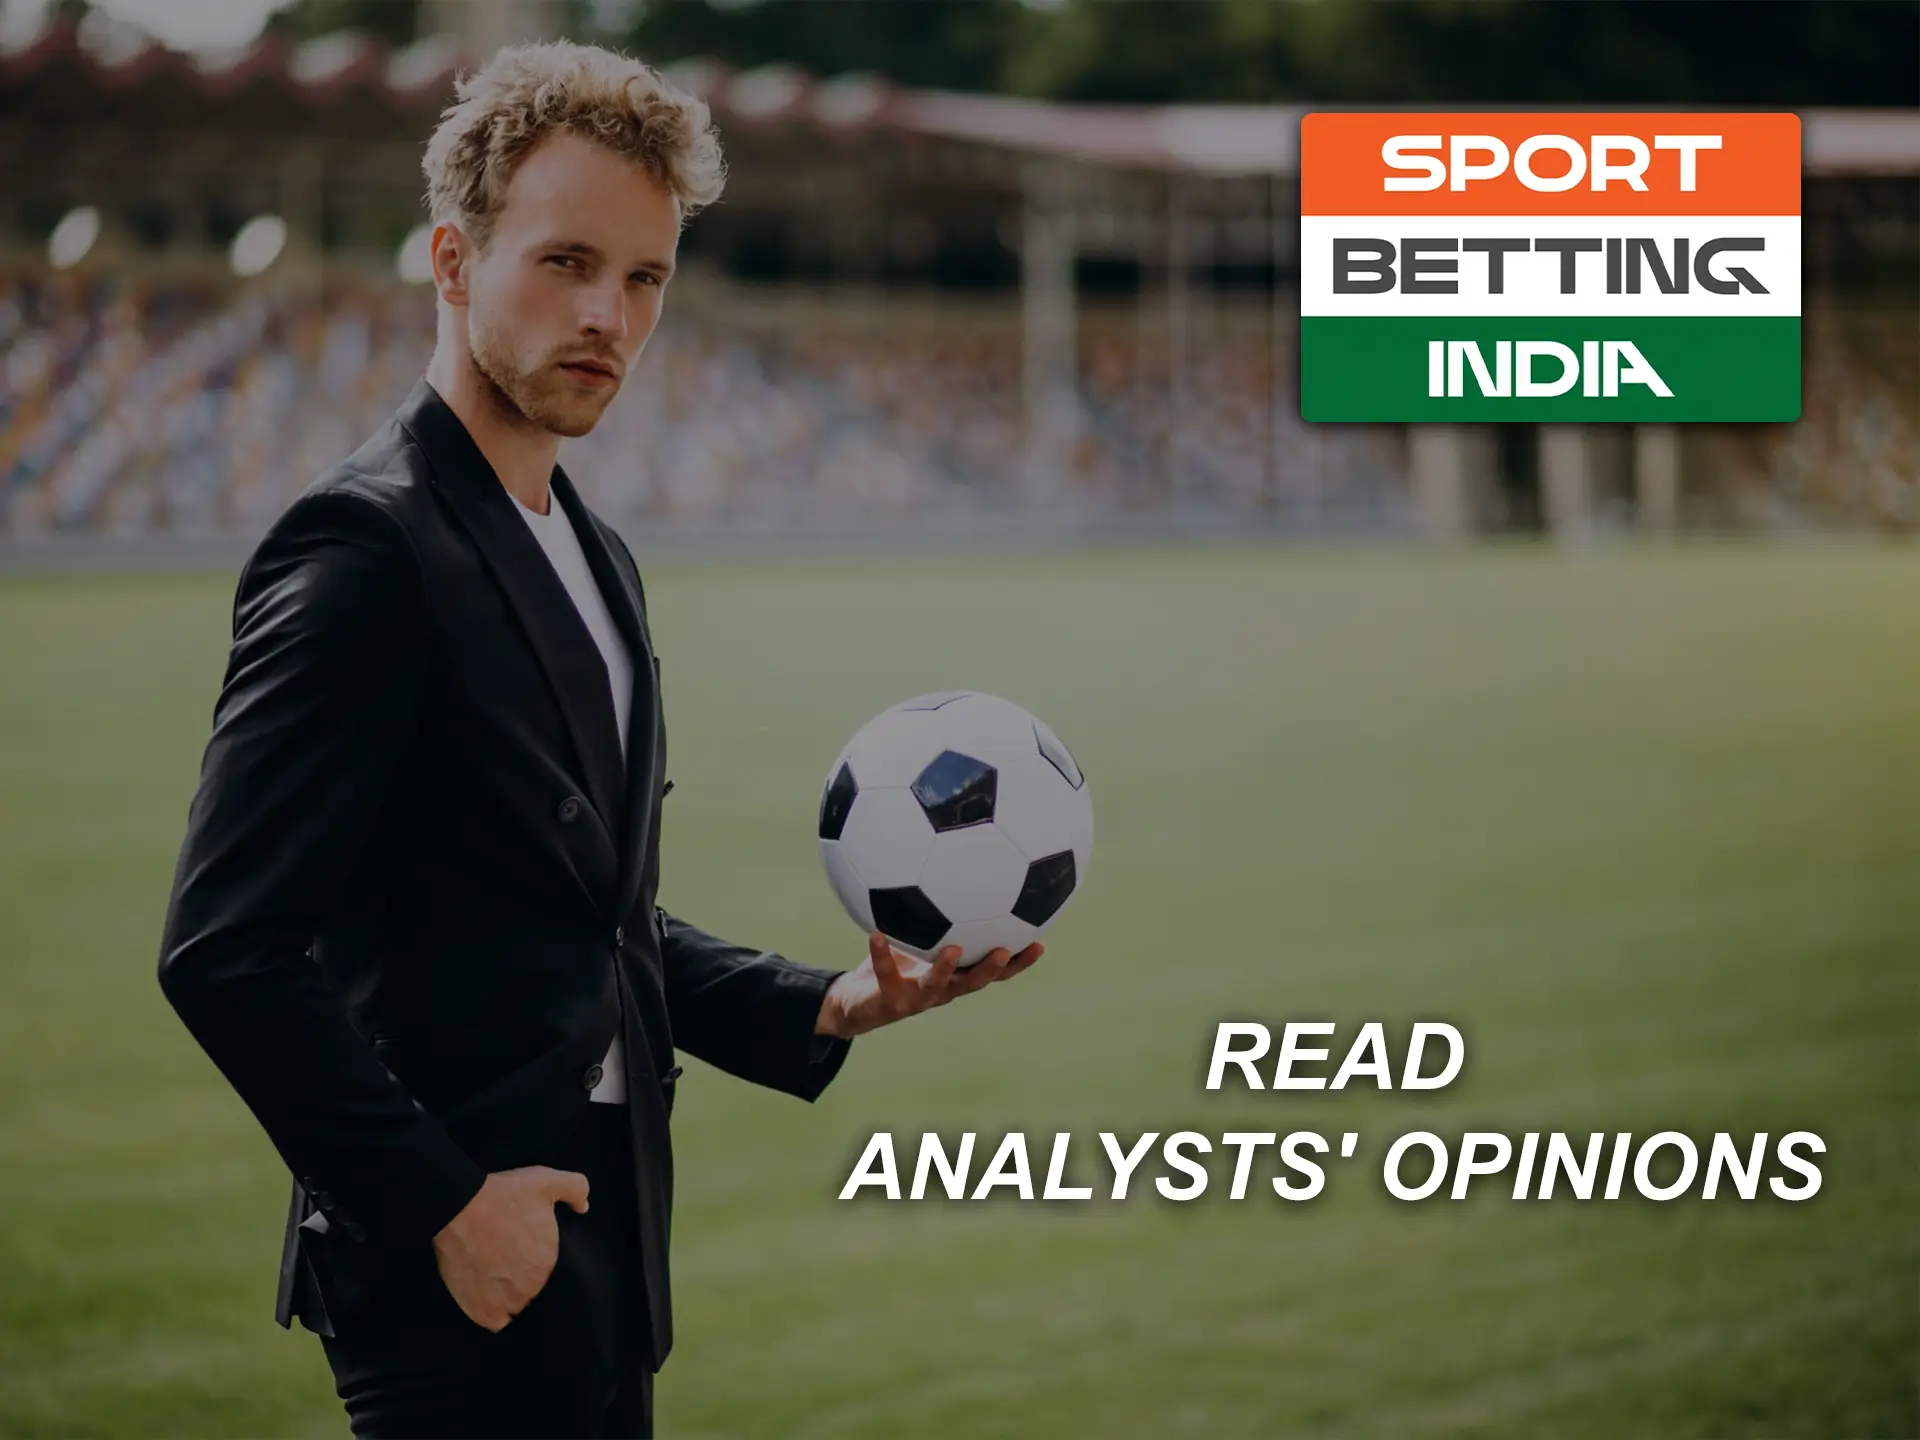 Learn useful tips from professional sports event analysts and make the right outcomes.